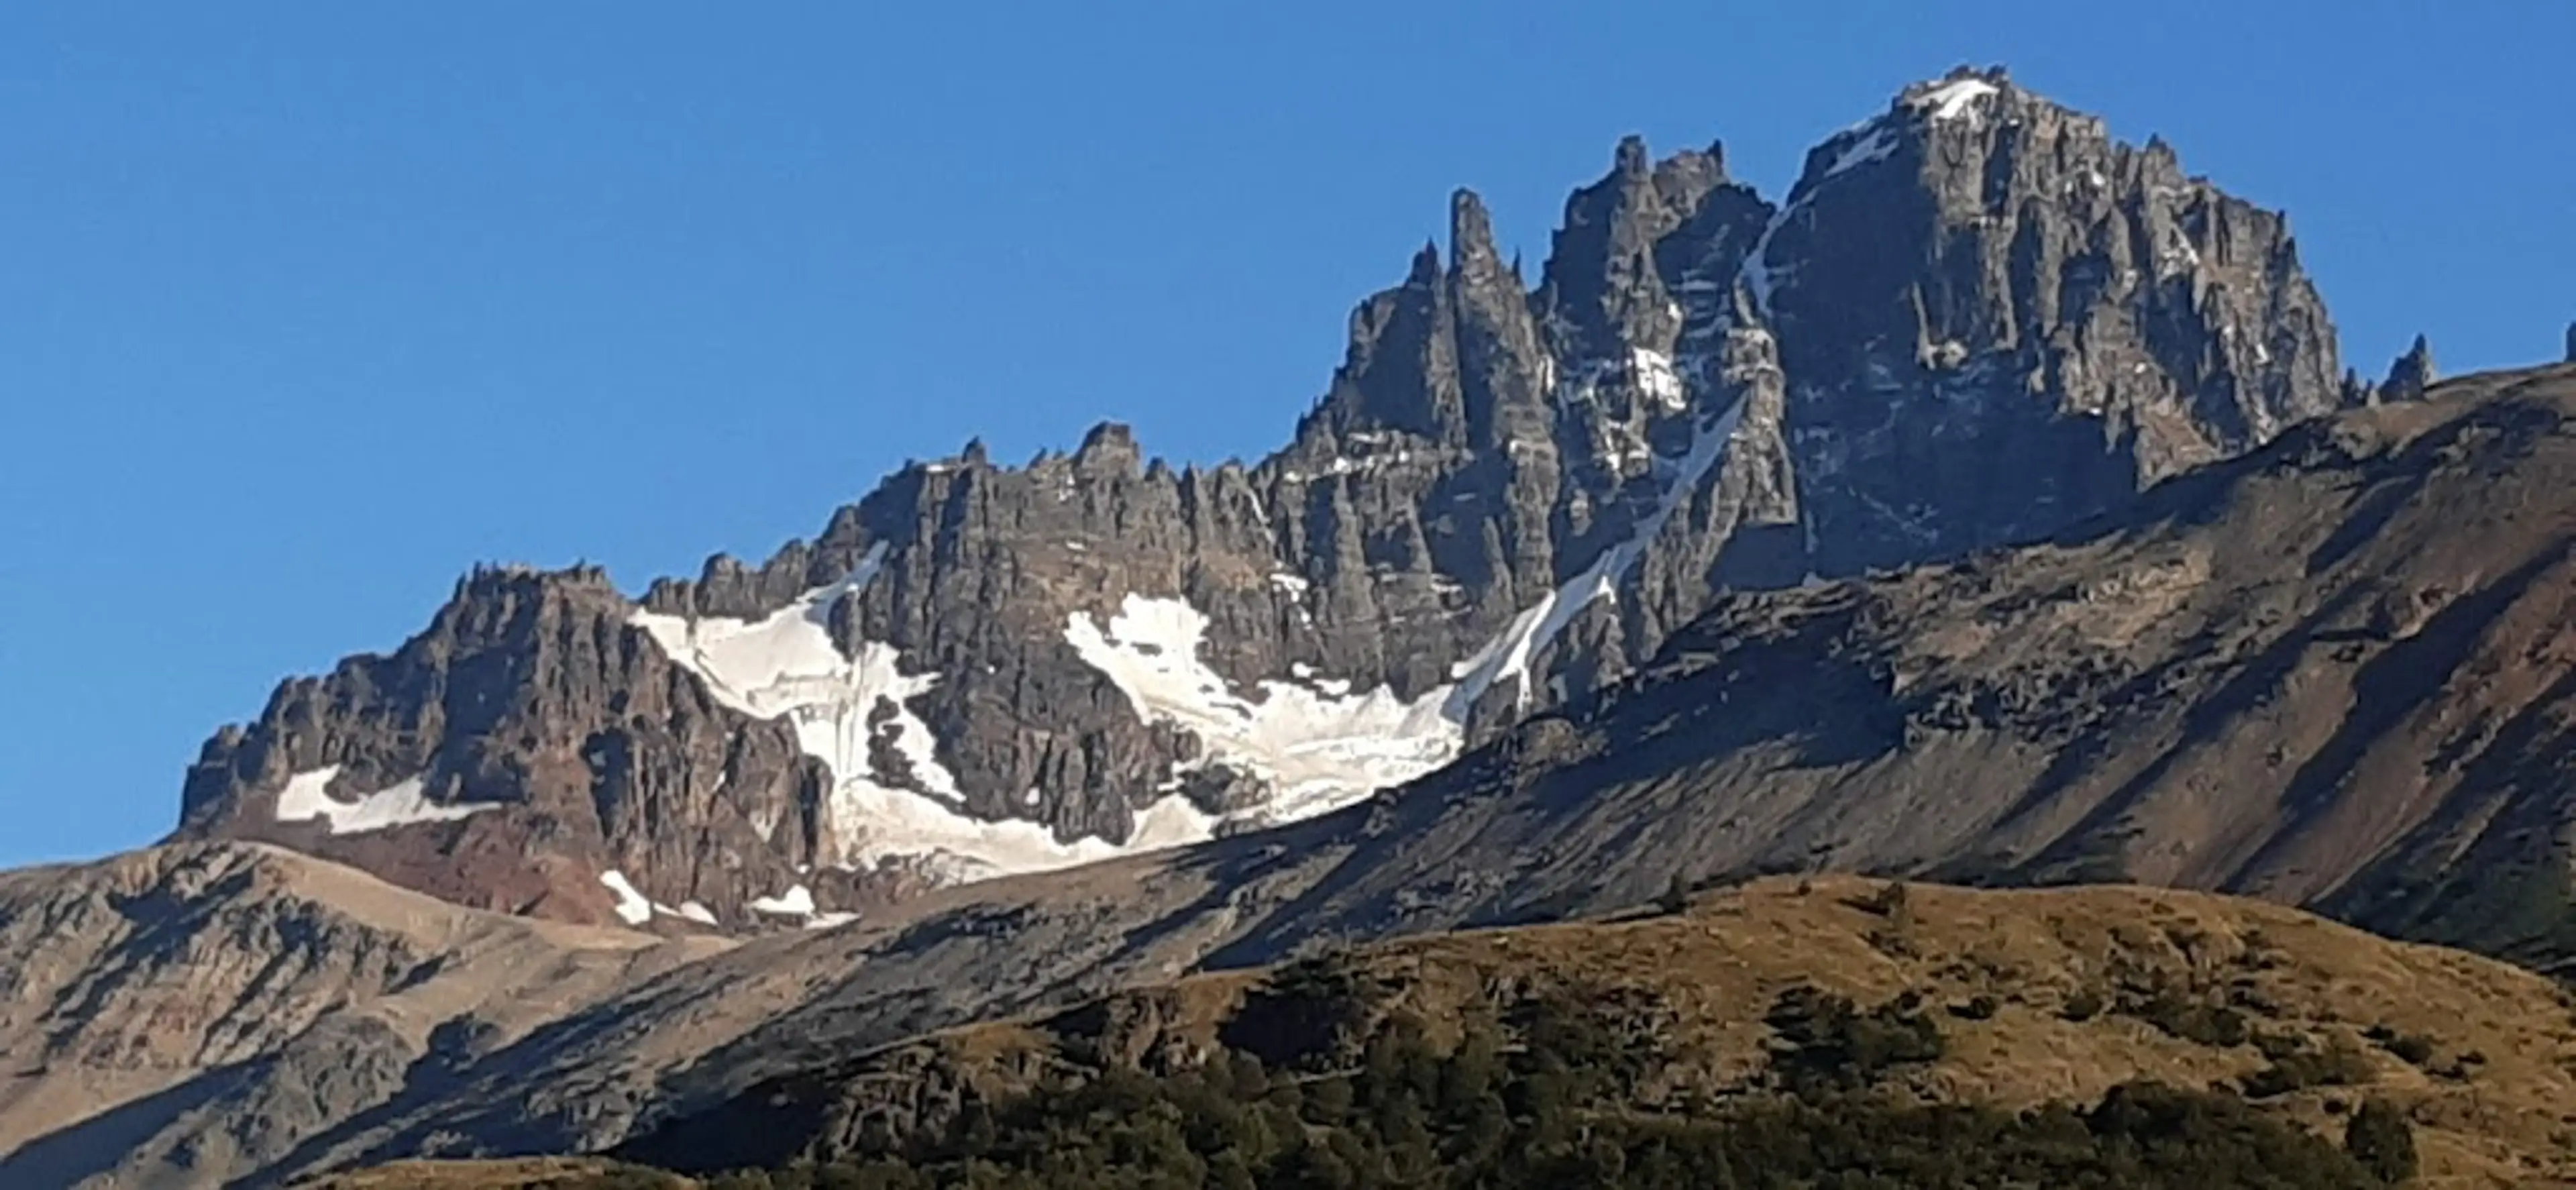 Base of the Torres del Paine